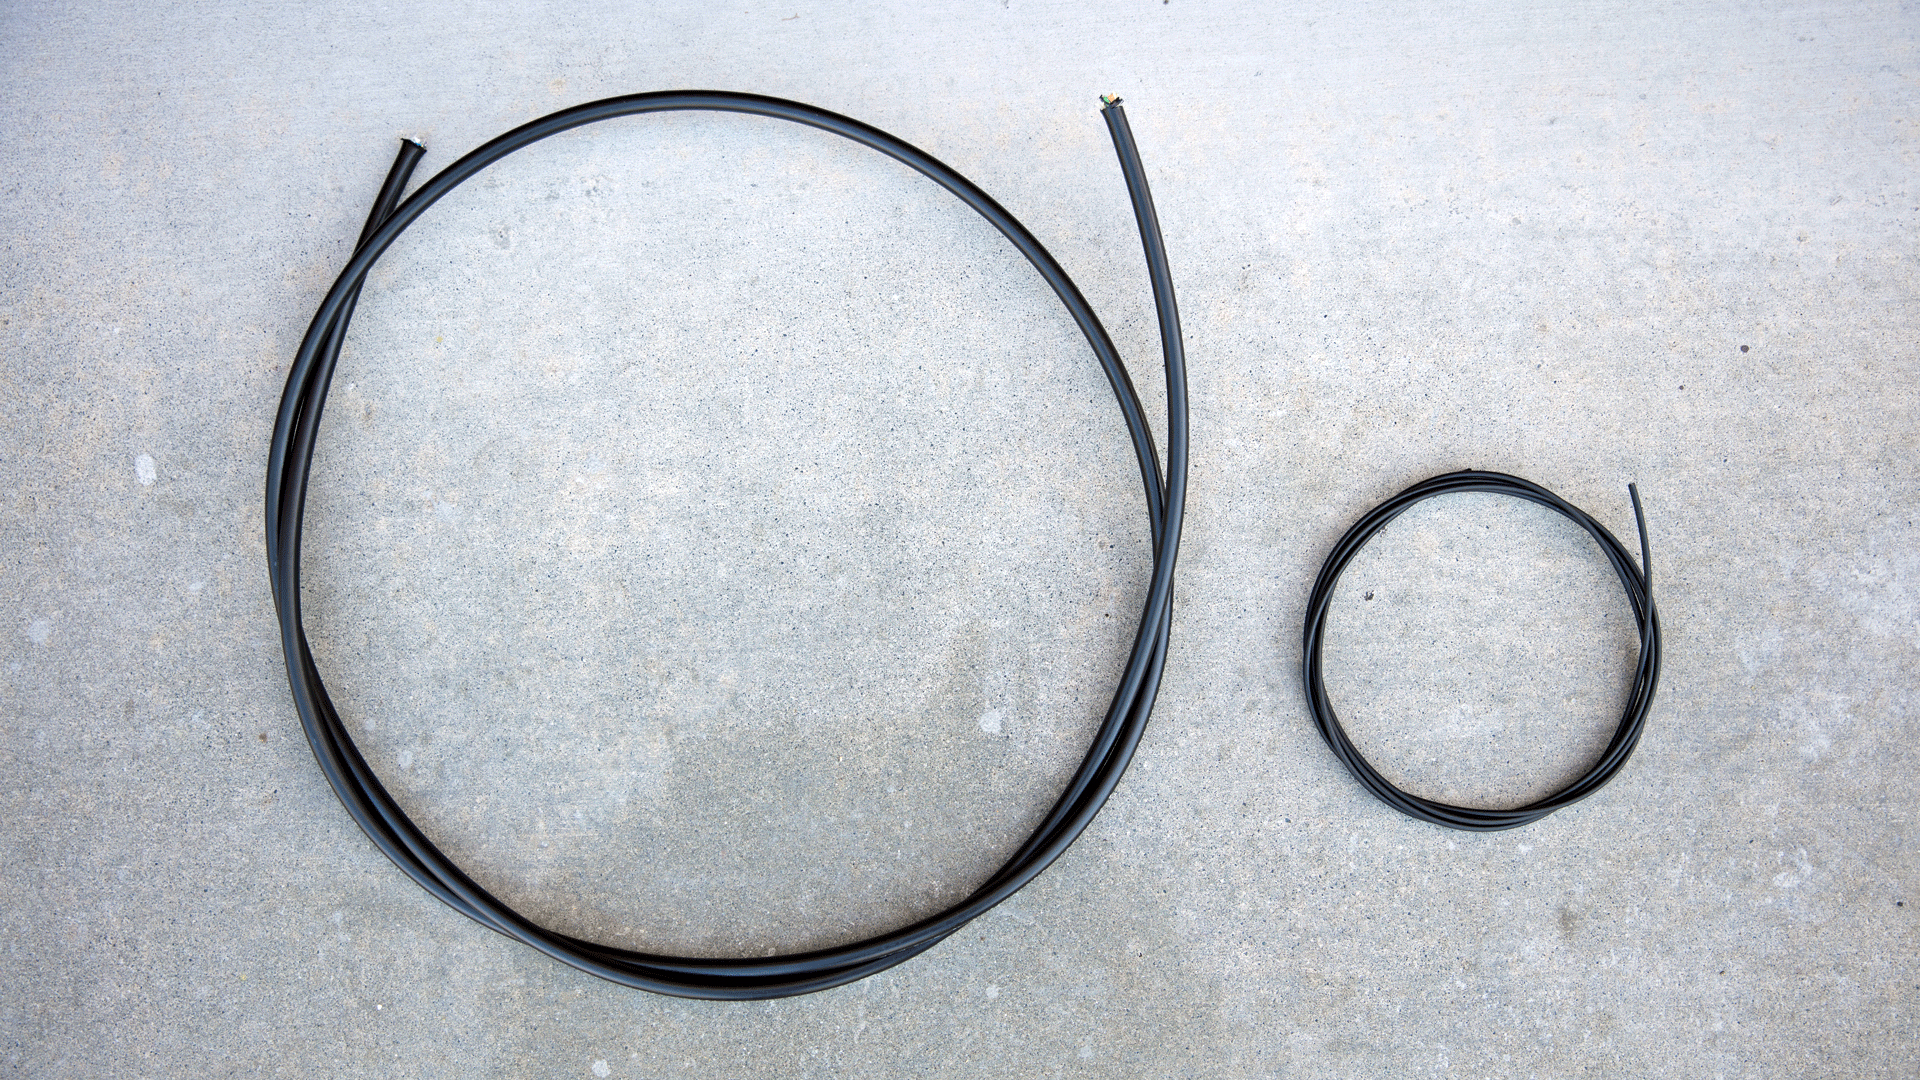 Cable on left is standard aerial fiber optic cable (1 km span weighs ~250 lbs). Cable on right is an equivalent length of the fiber cable developed in this program (1 km span weighs 28 lbs)